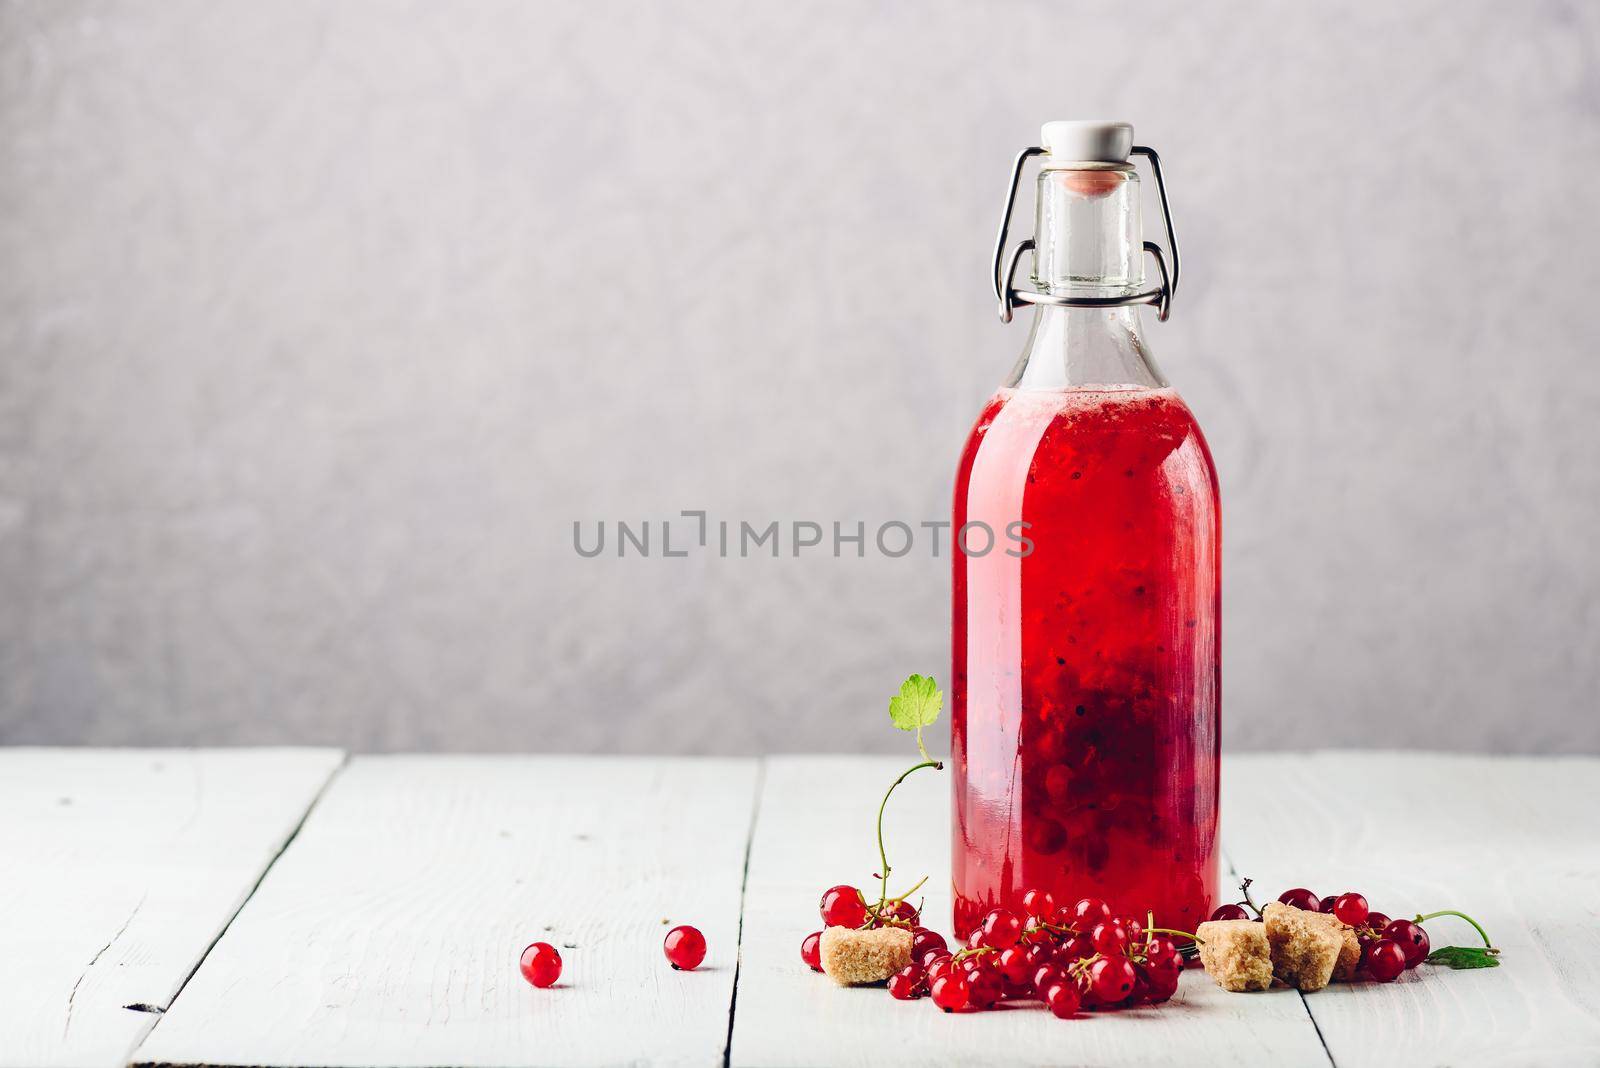 Bottle of infused water with fresh red currant and cane sugar